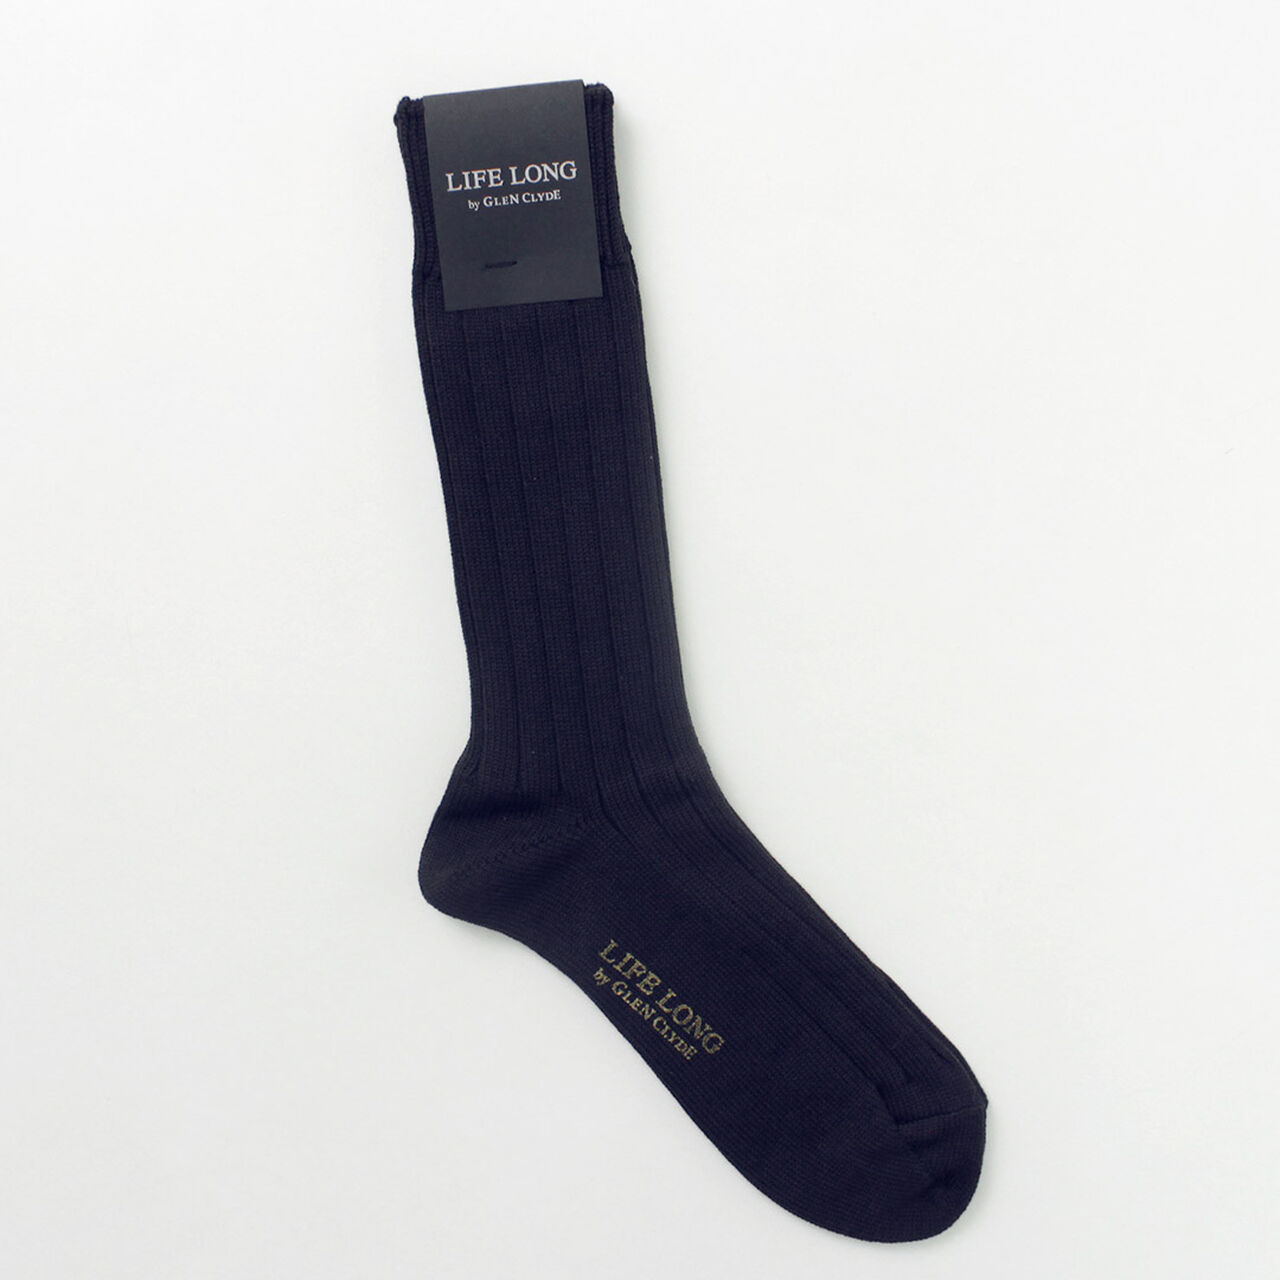 TS-1 Cotton and Cordura ribbed socks,Navy, large image number 0